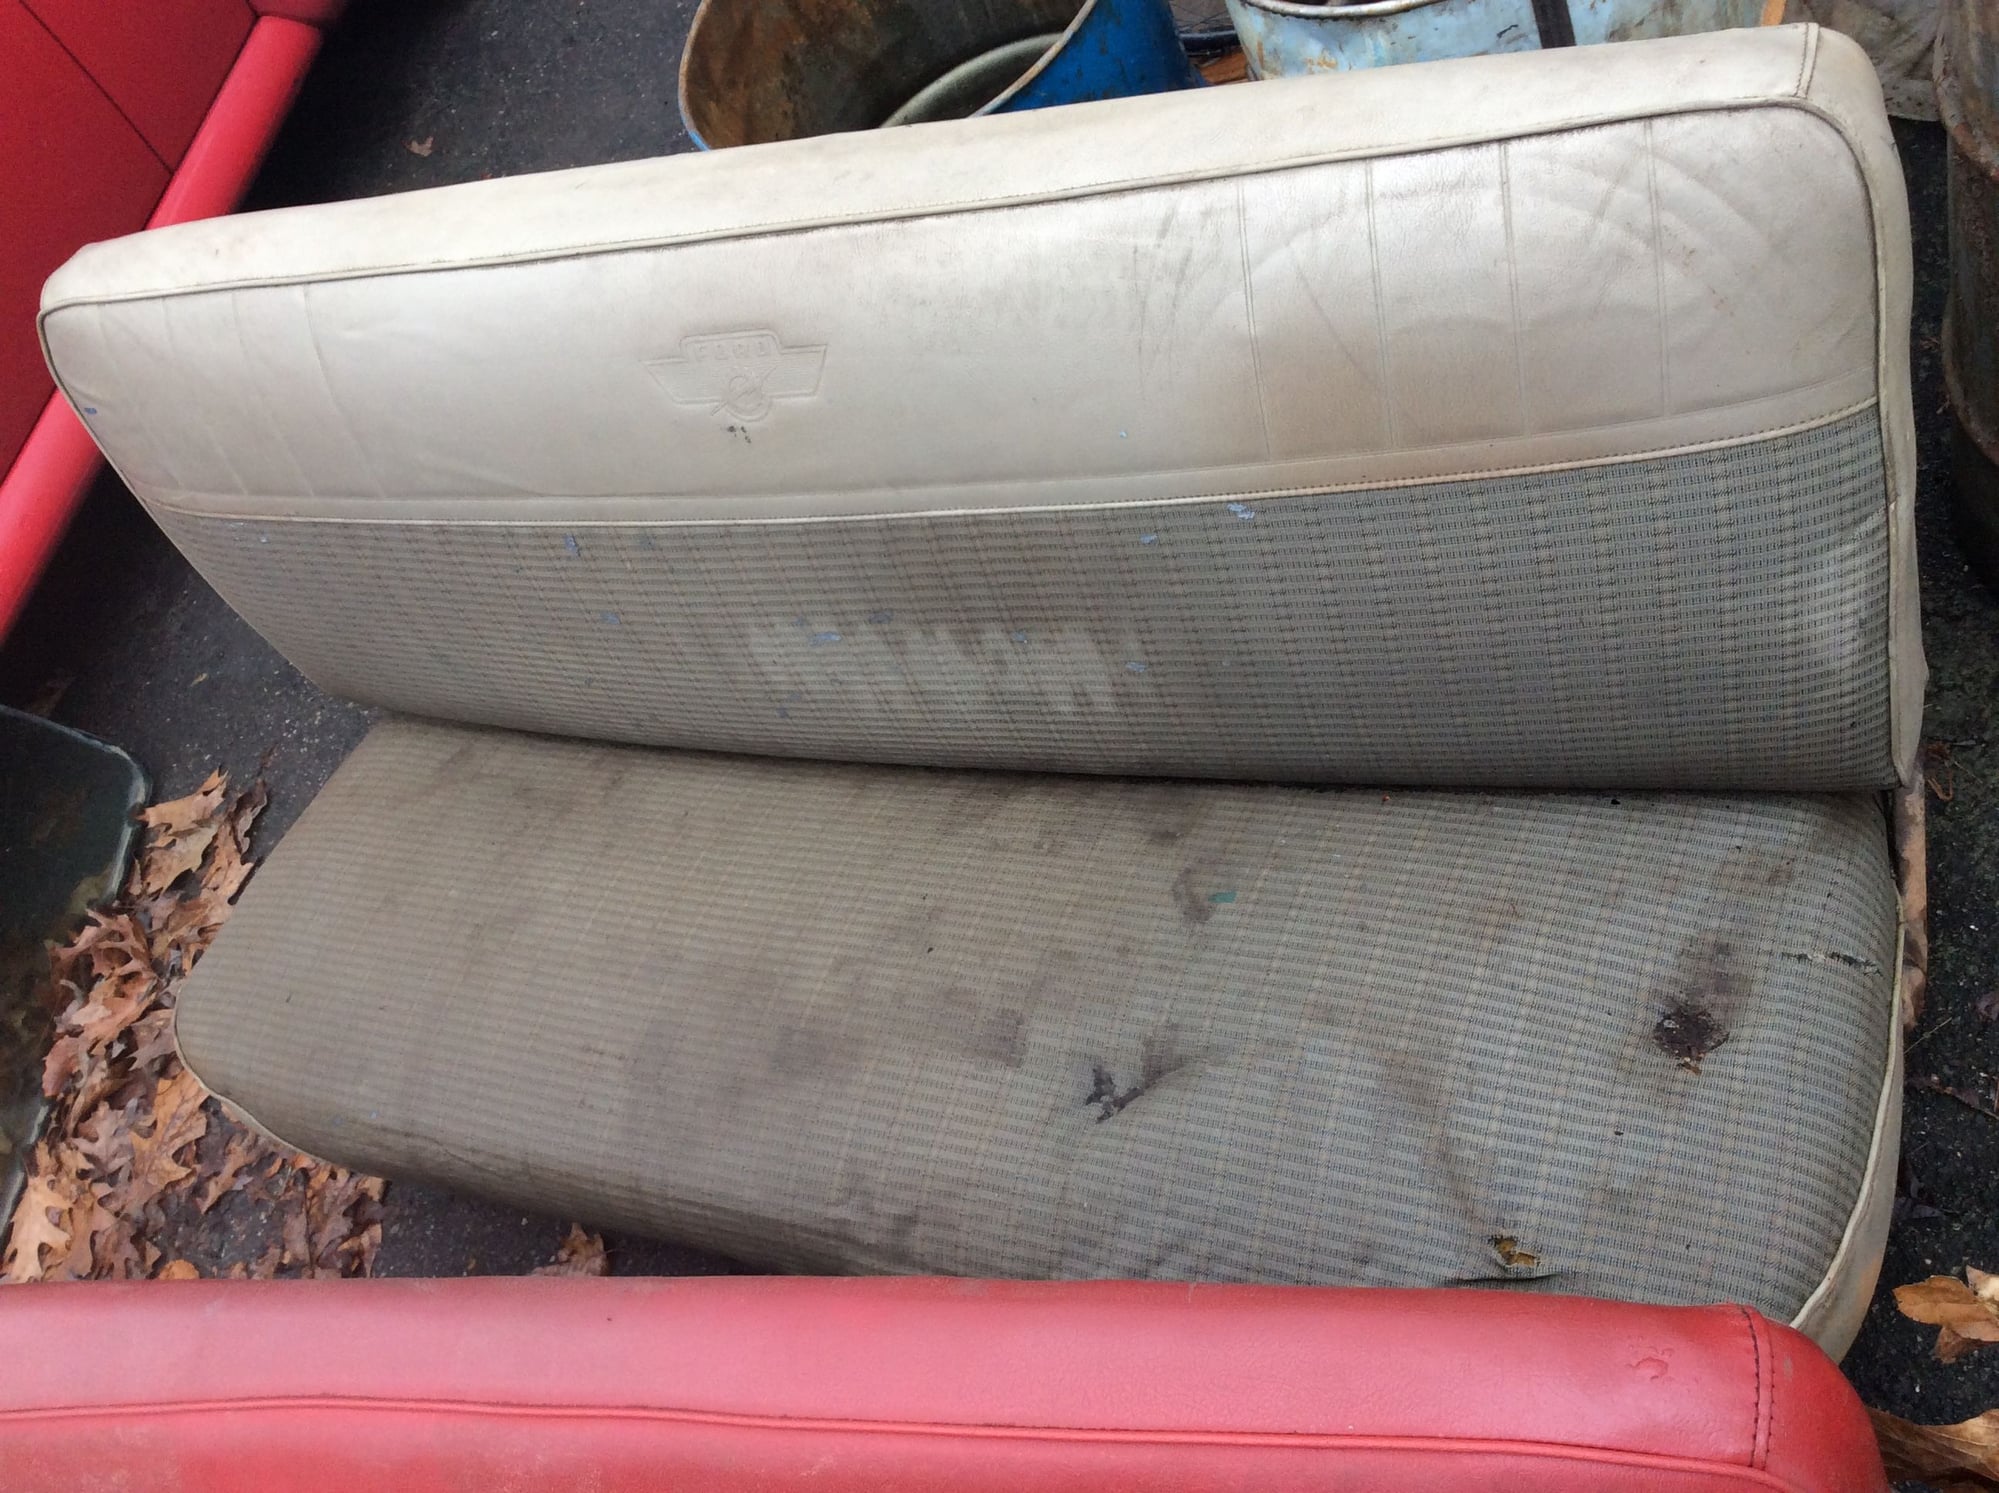 Interior/Upholstery - F100 Bench Seats - Used - 1961 to 1979  All Models - Richmond, VA 23226, United States